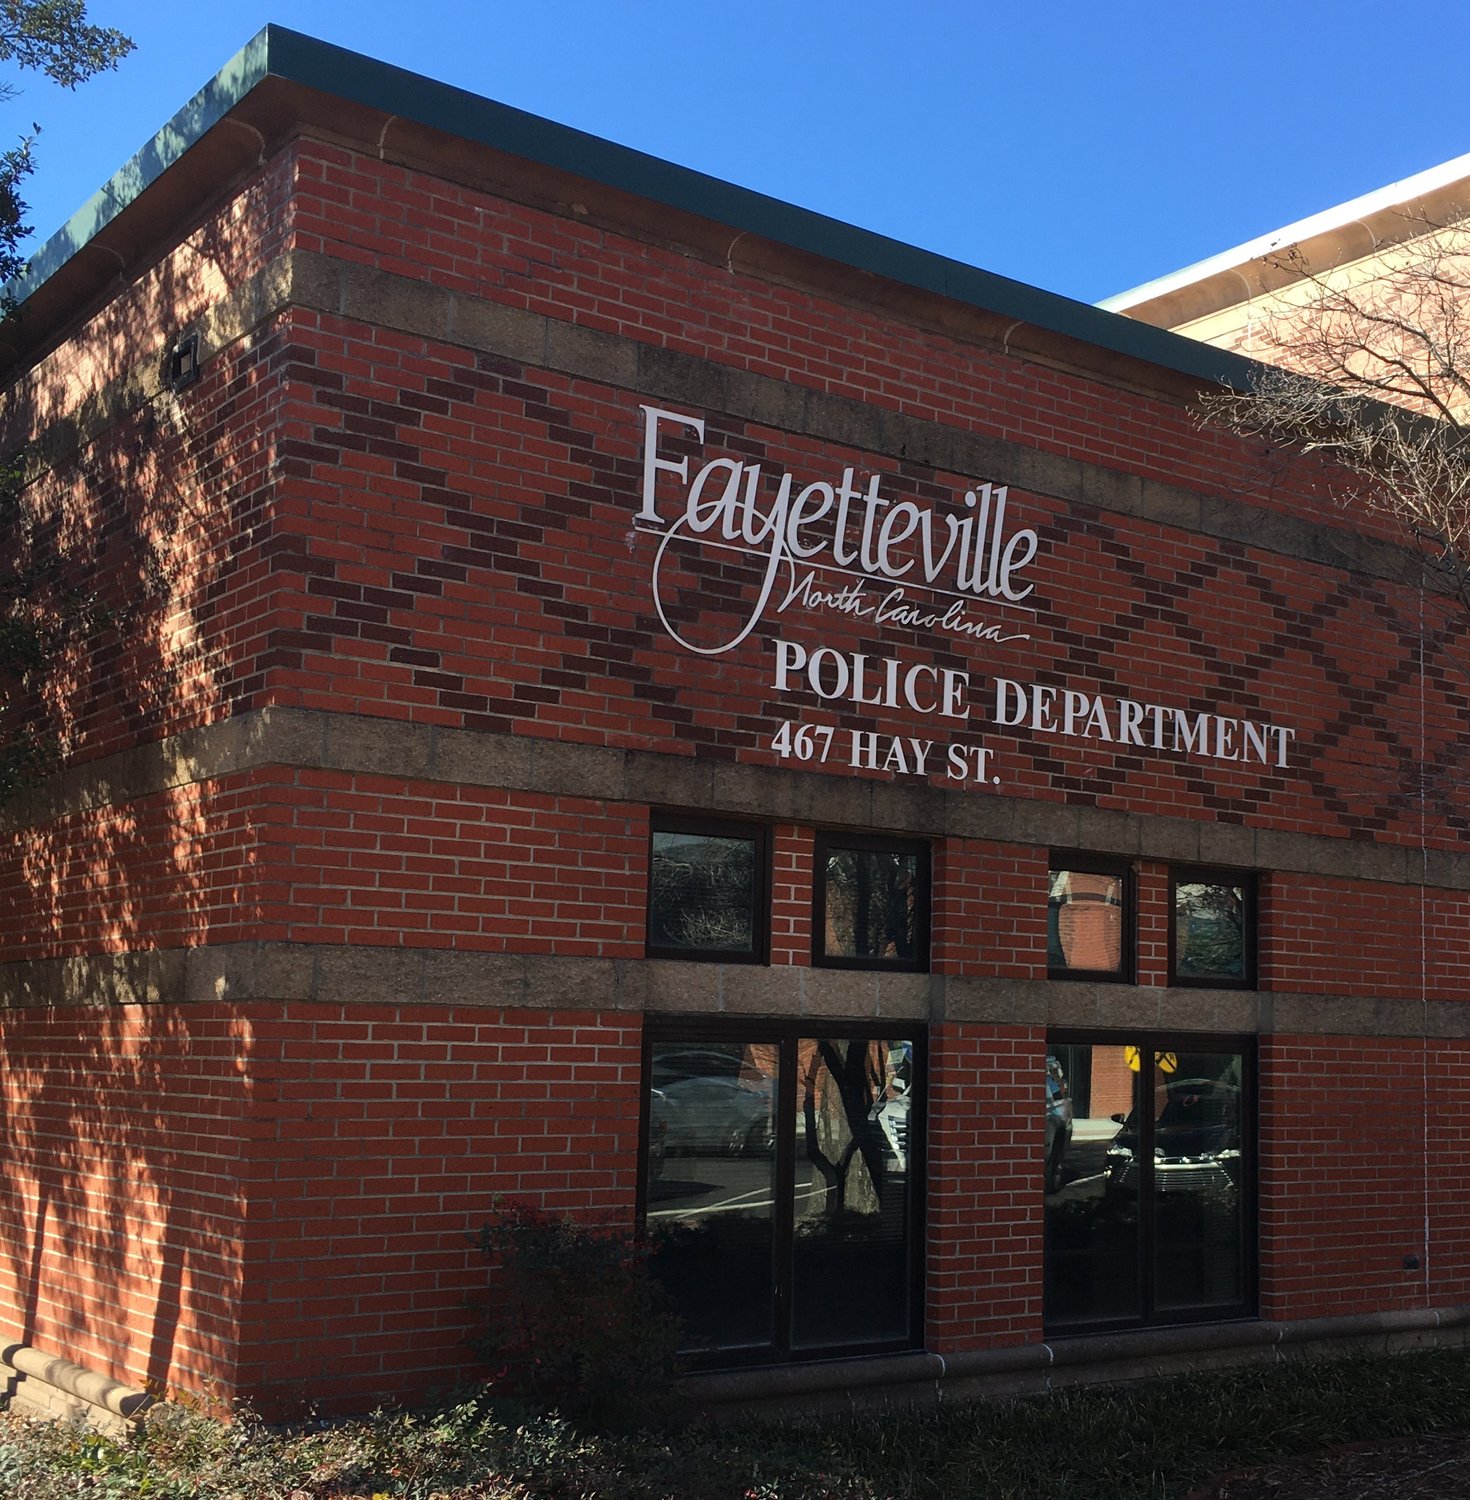 The executive director of the N.C. Police Benevolent Association says it is willing to help Fayetteville with its search for a new police chief.